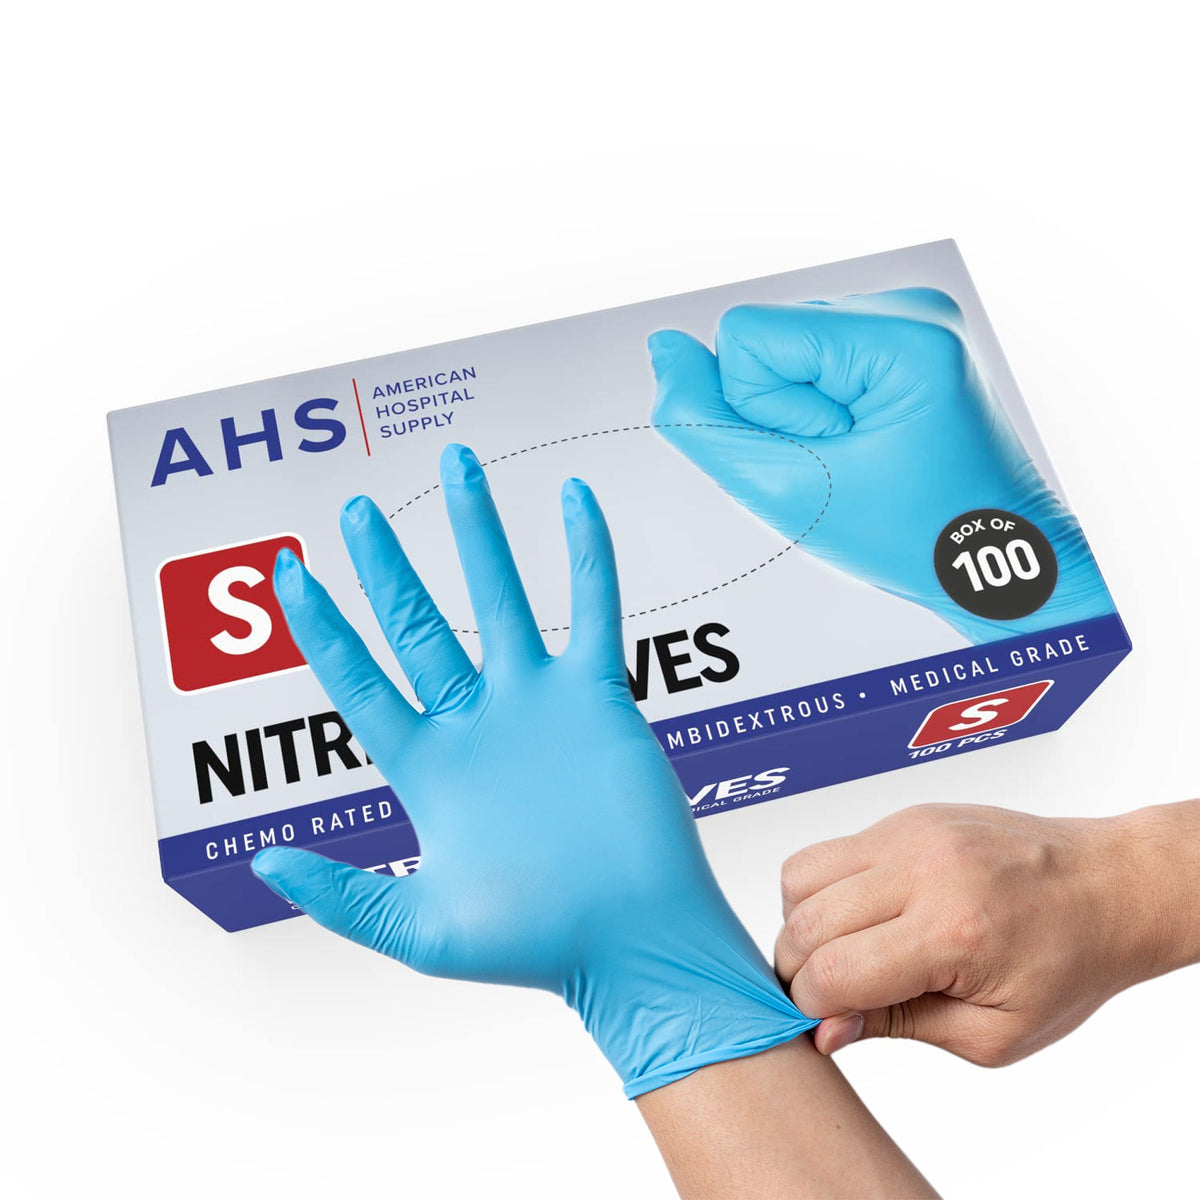 AHS Disposable Nitrile Exam Gloves, 3.5 MM, Chemo-Rated - American Hospital Supply